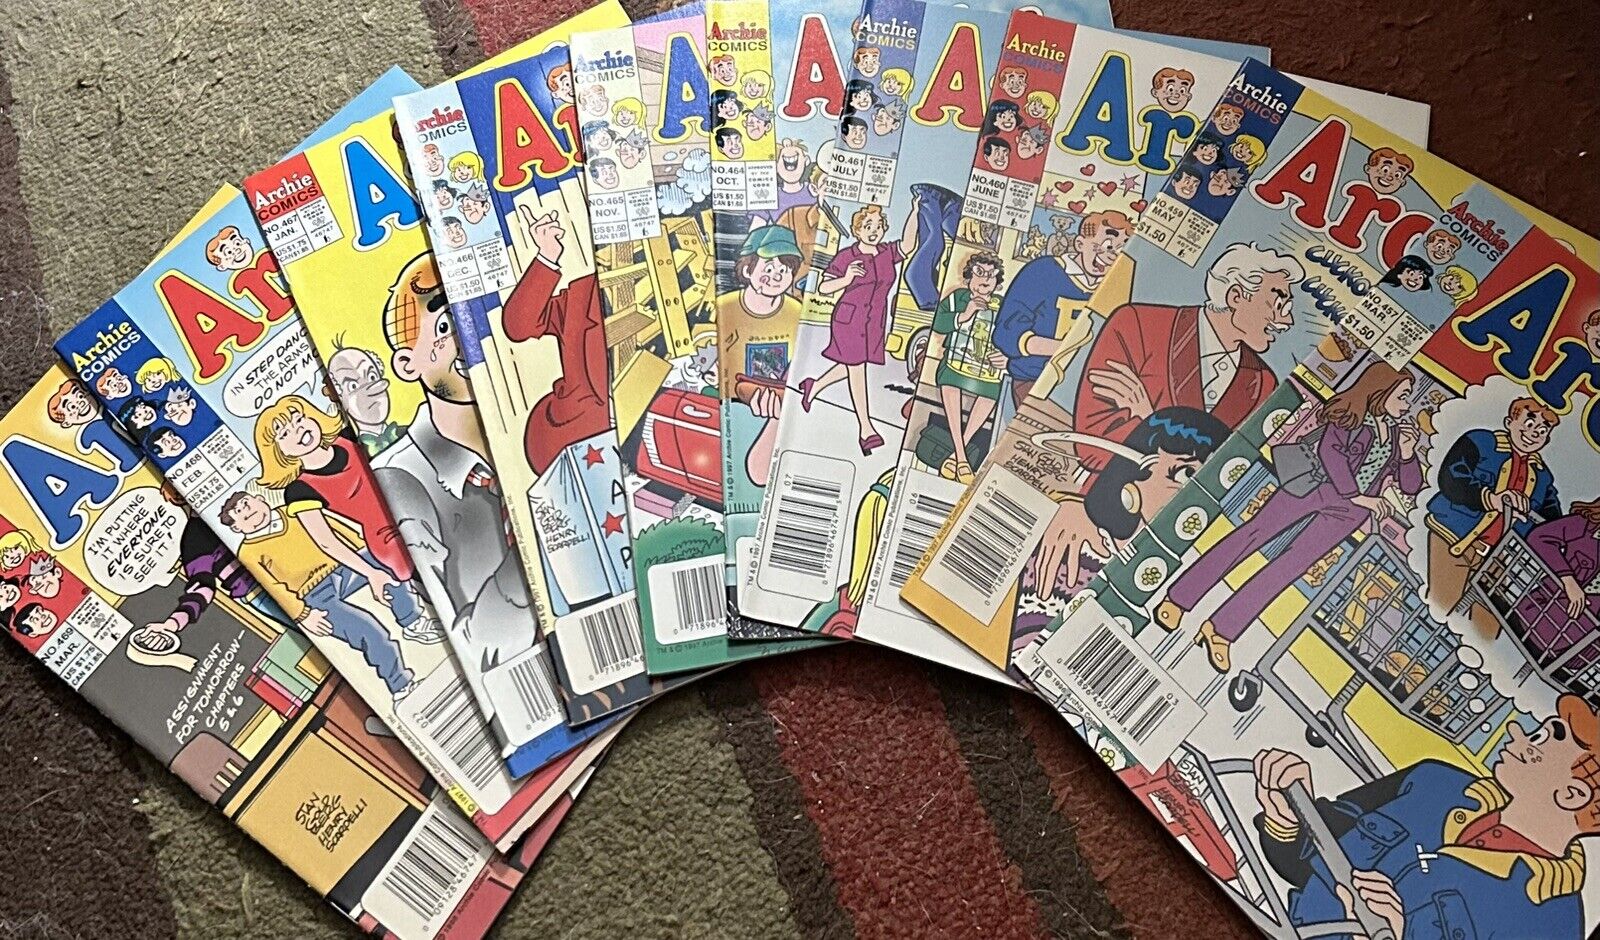 Archie 457 459 460 461 464 465 466 467 468 469 Newsstand Variant Lot (FN+ To VF)